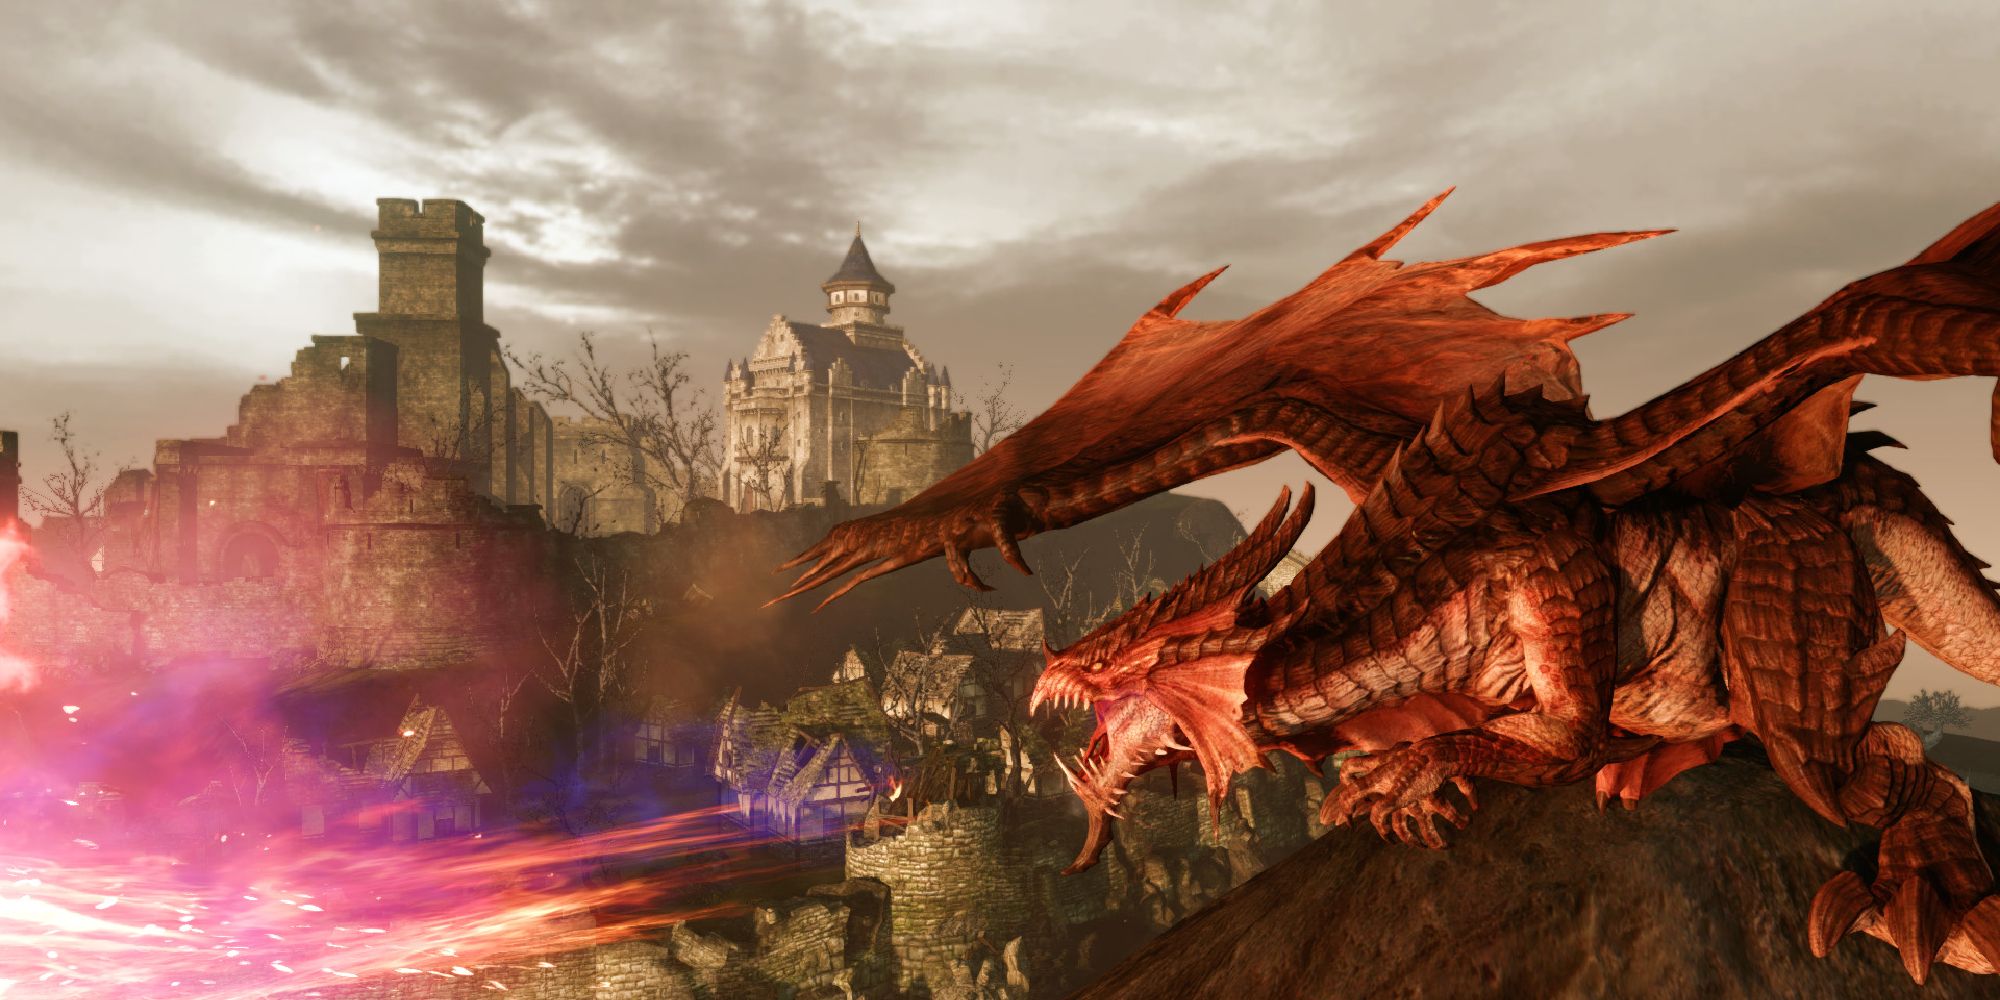 dragon breathing fire with castle in background